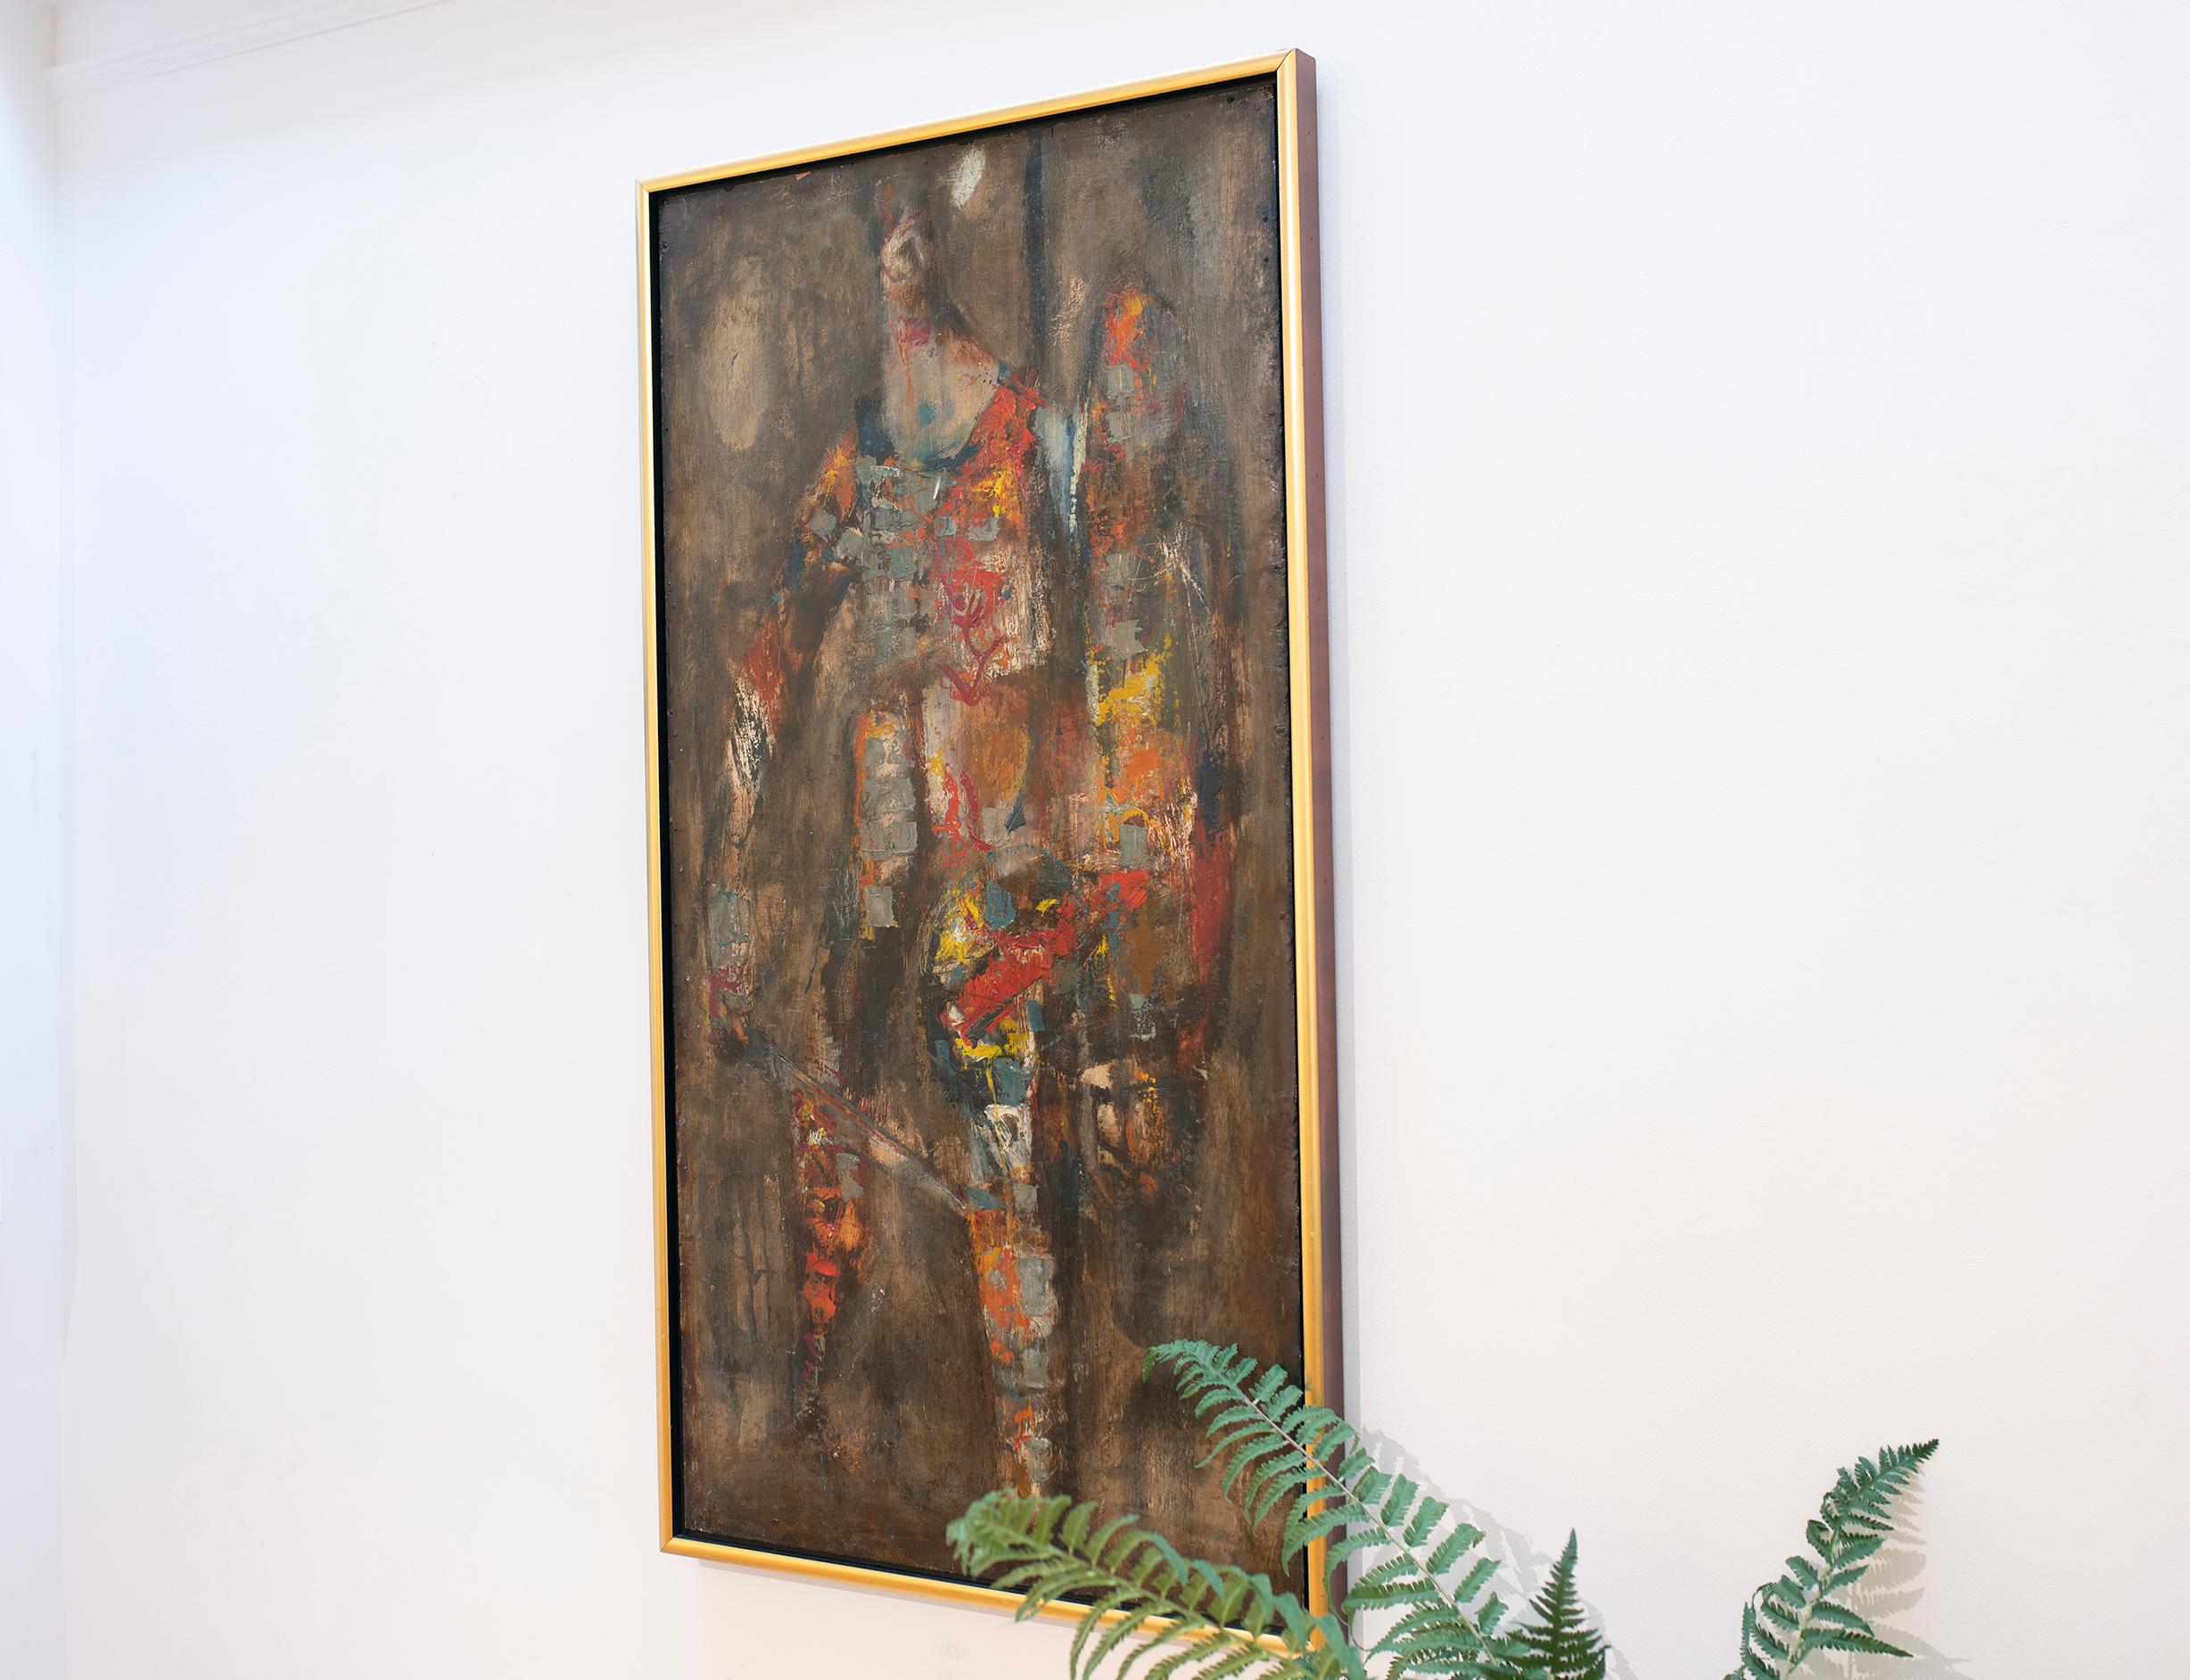 This vertical format abstract painting by Modernist artist Stanley Bate measures at 26